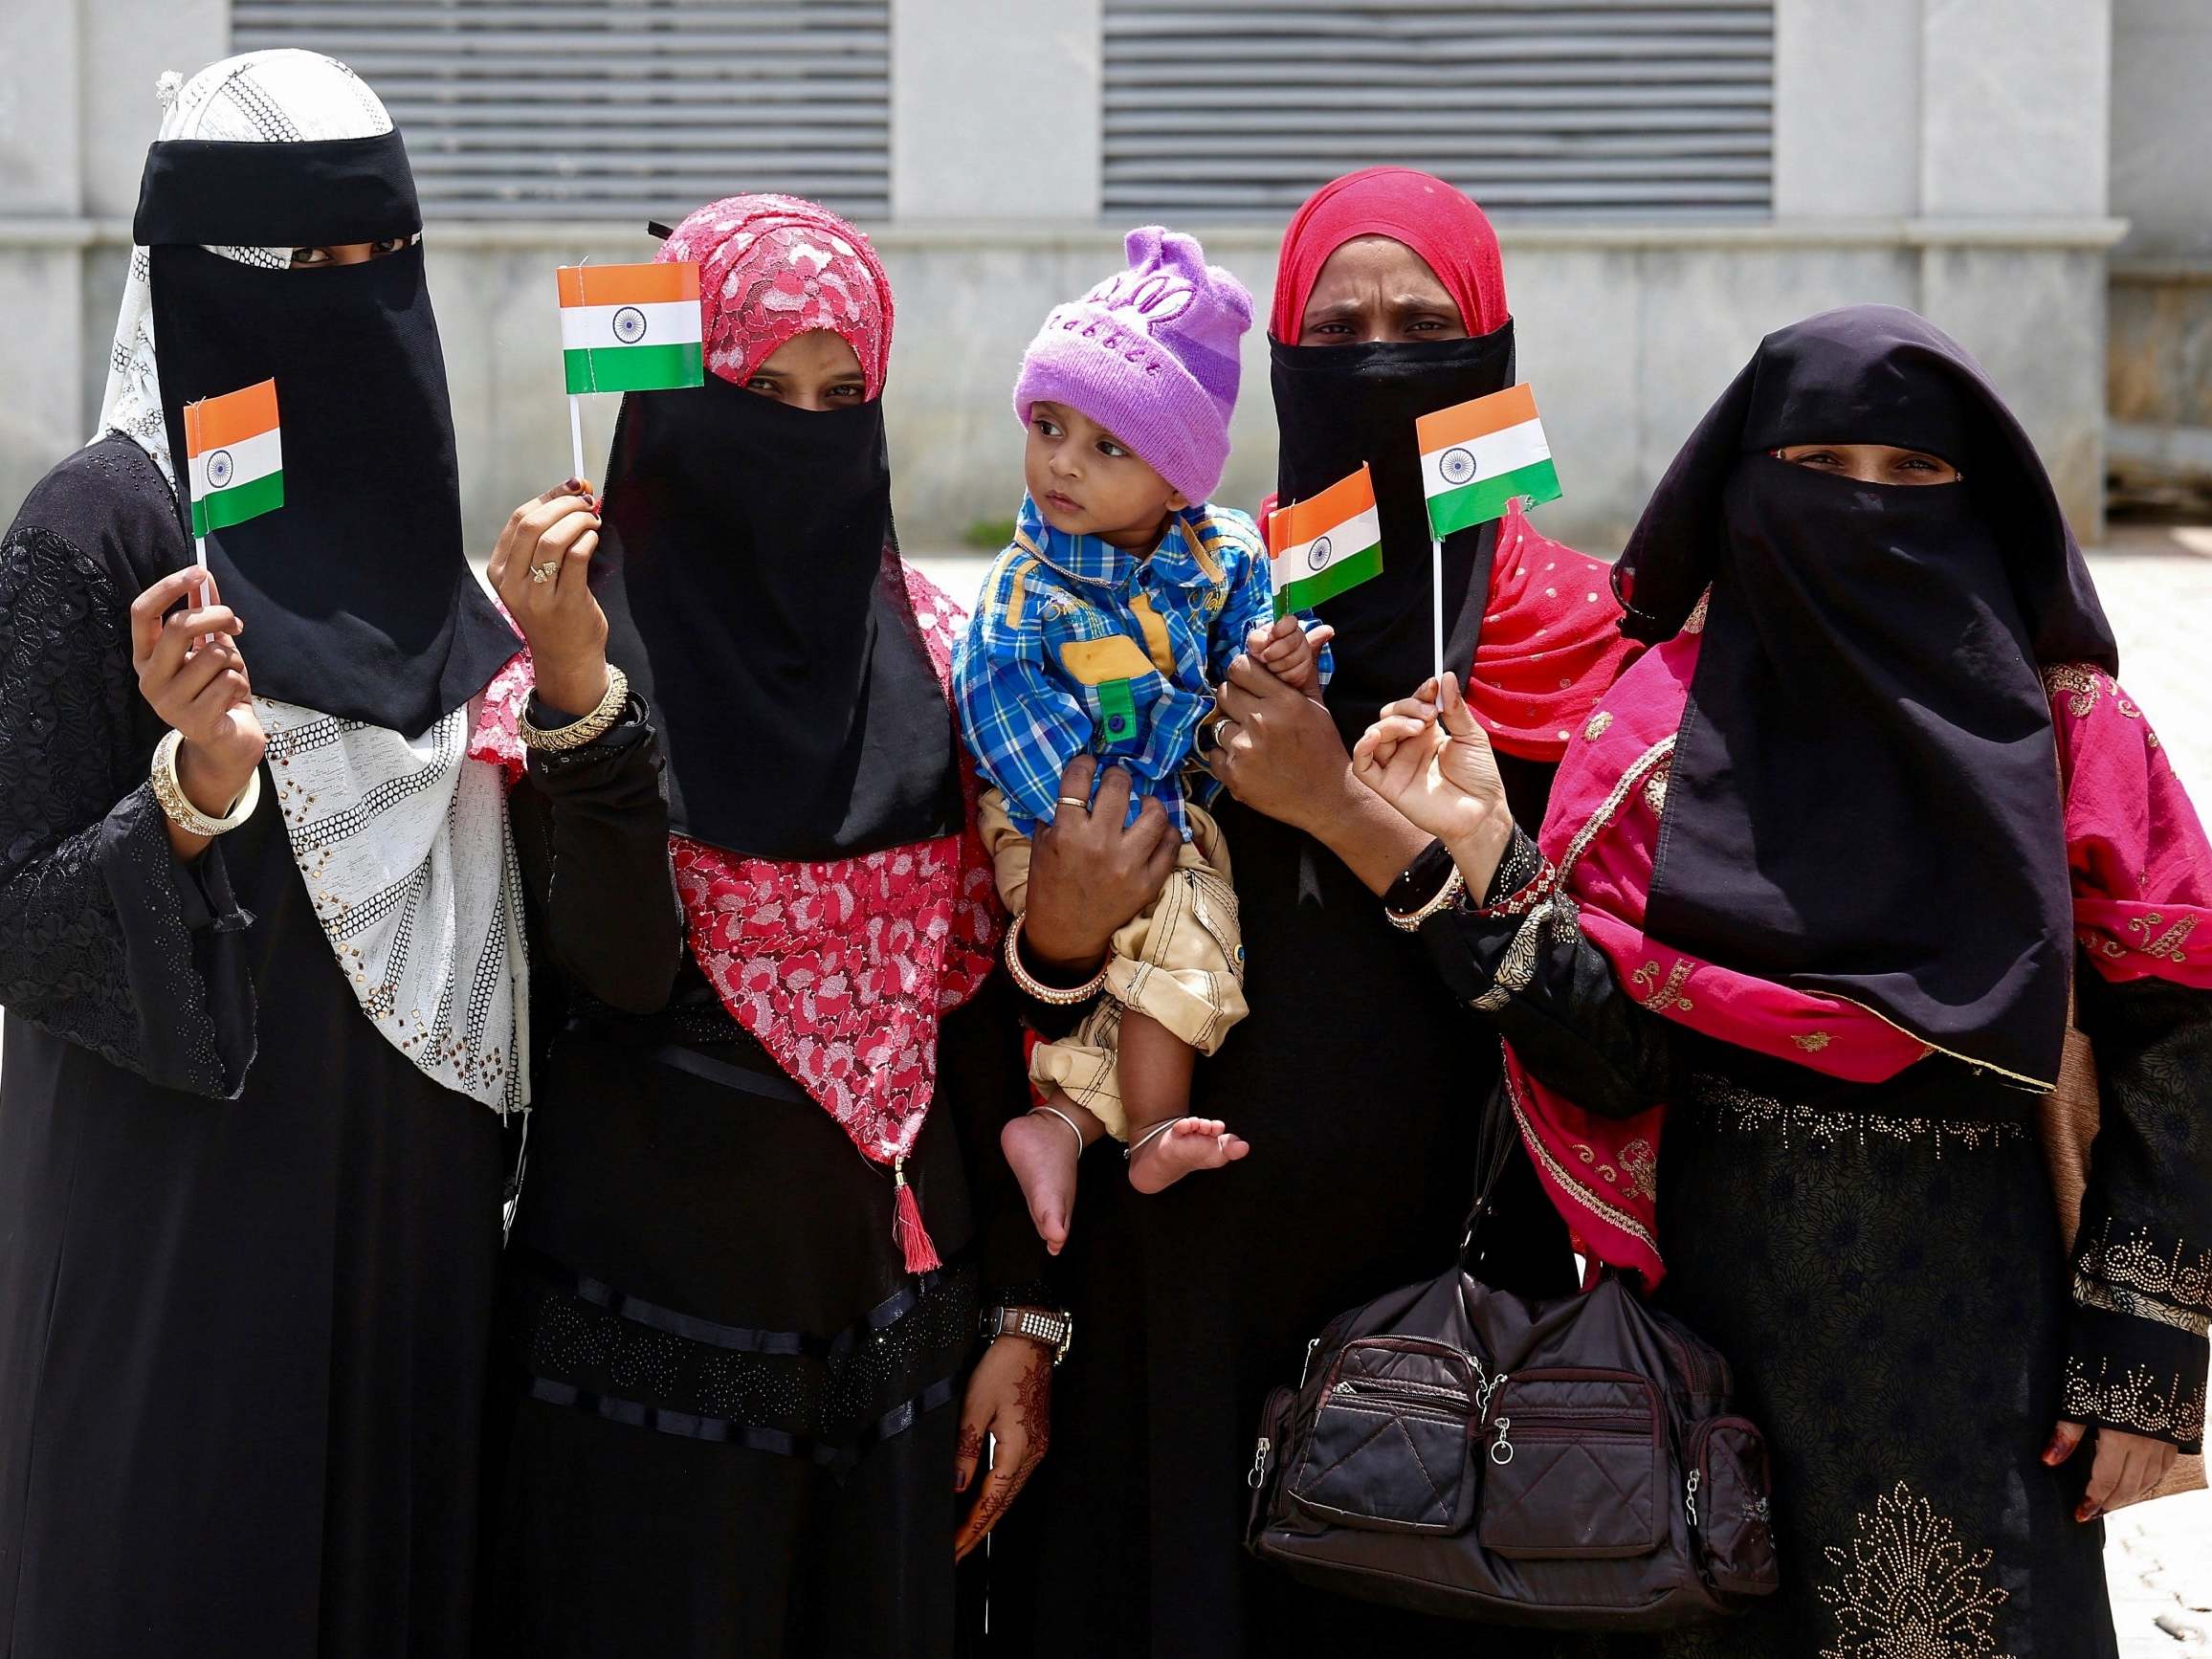 Indian Muslim women pose with Indian flags on the anniversary of independence from British rule in Bangalore, India